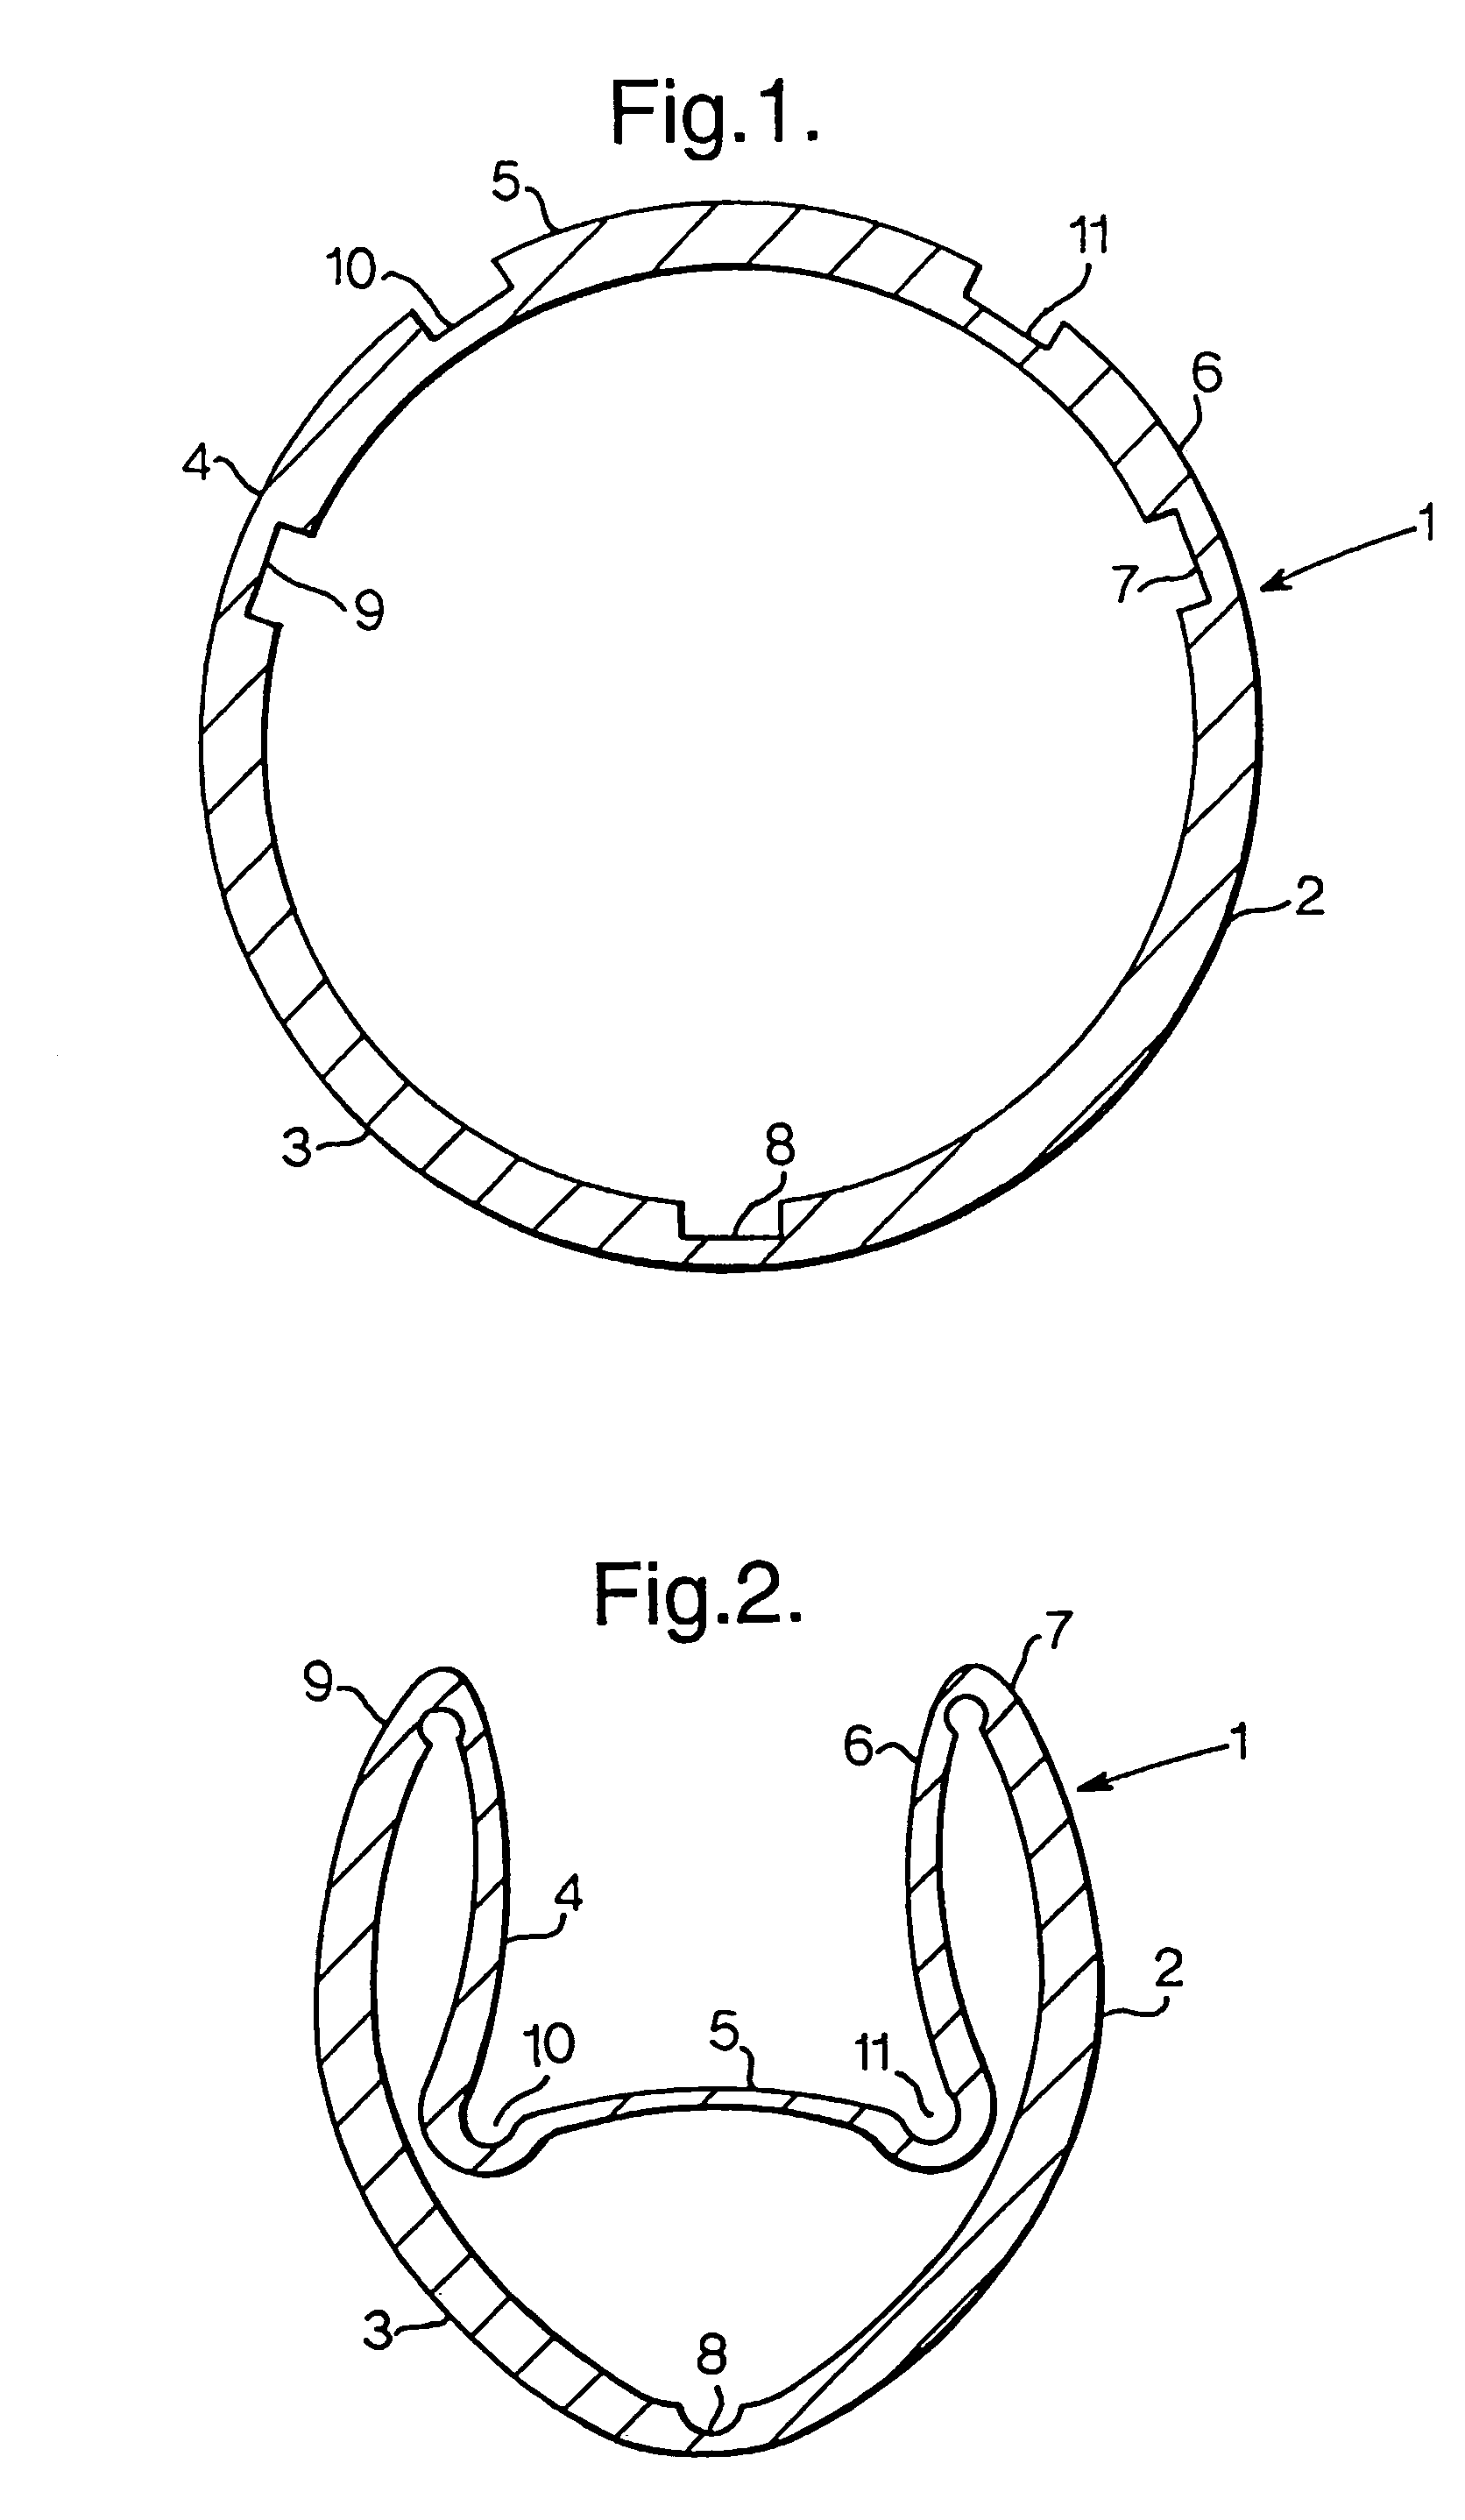 Contractable and expandable tubular wellbore system